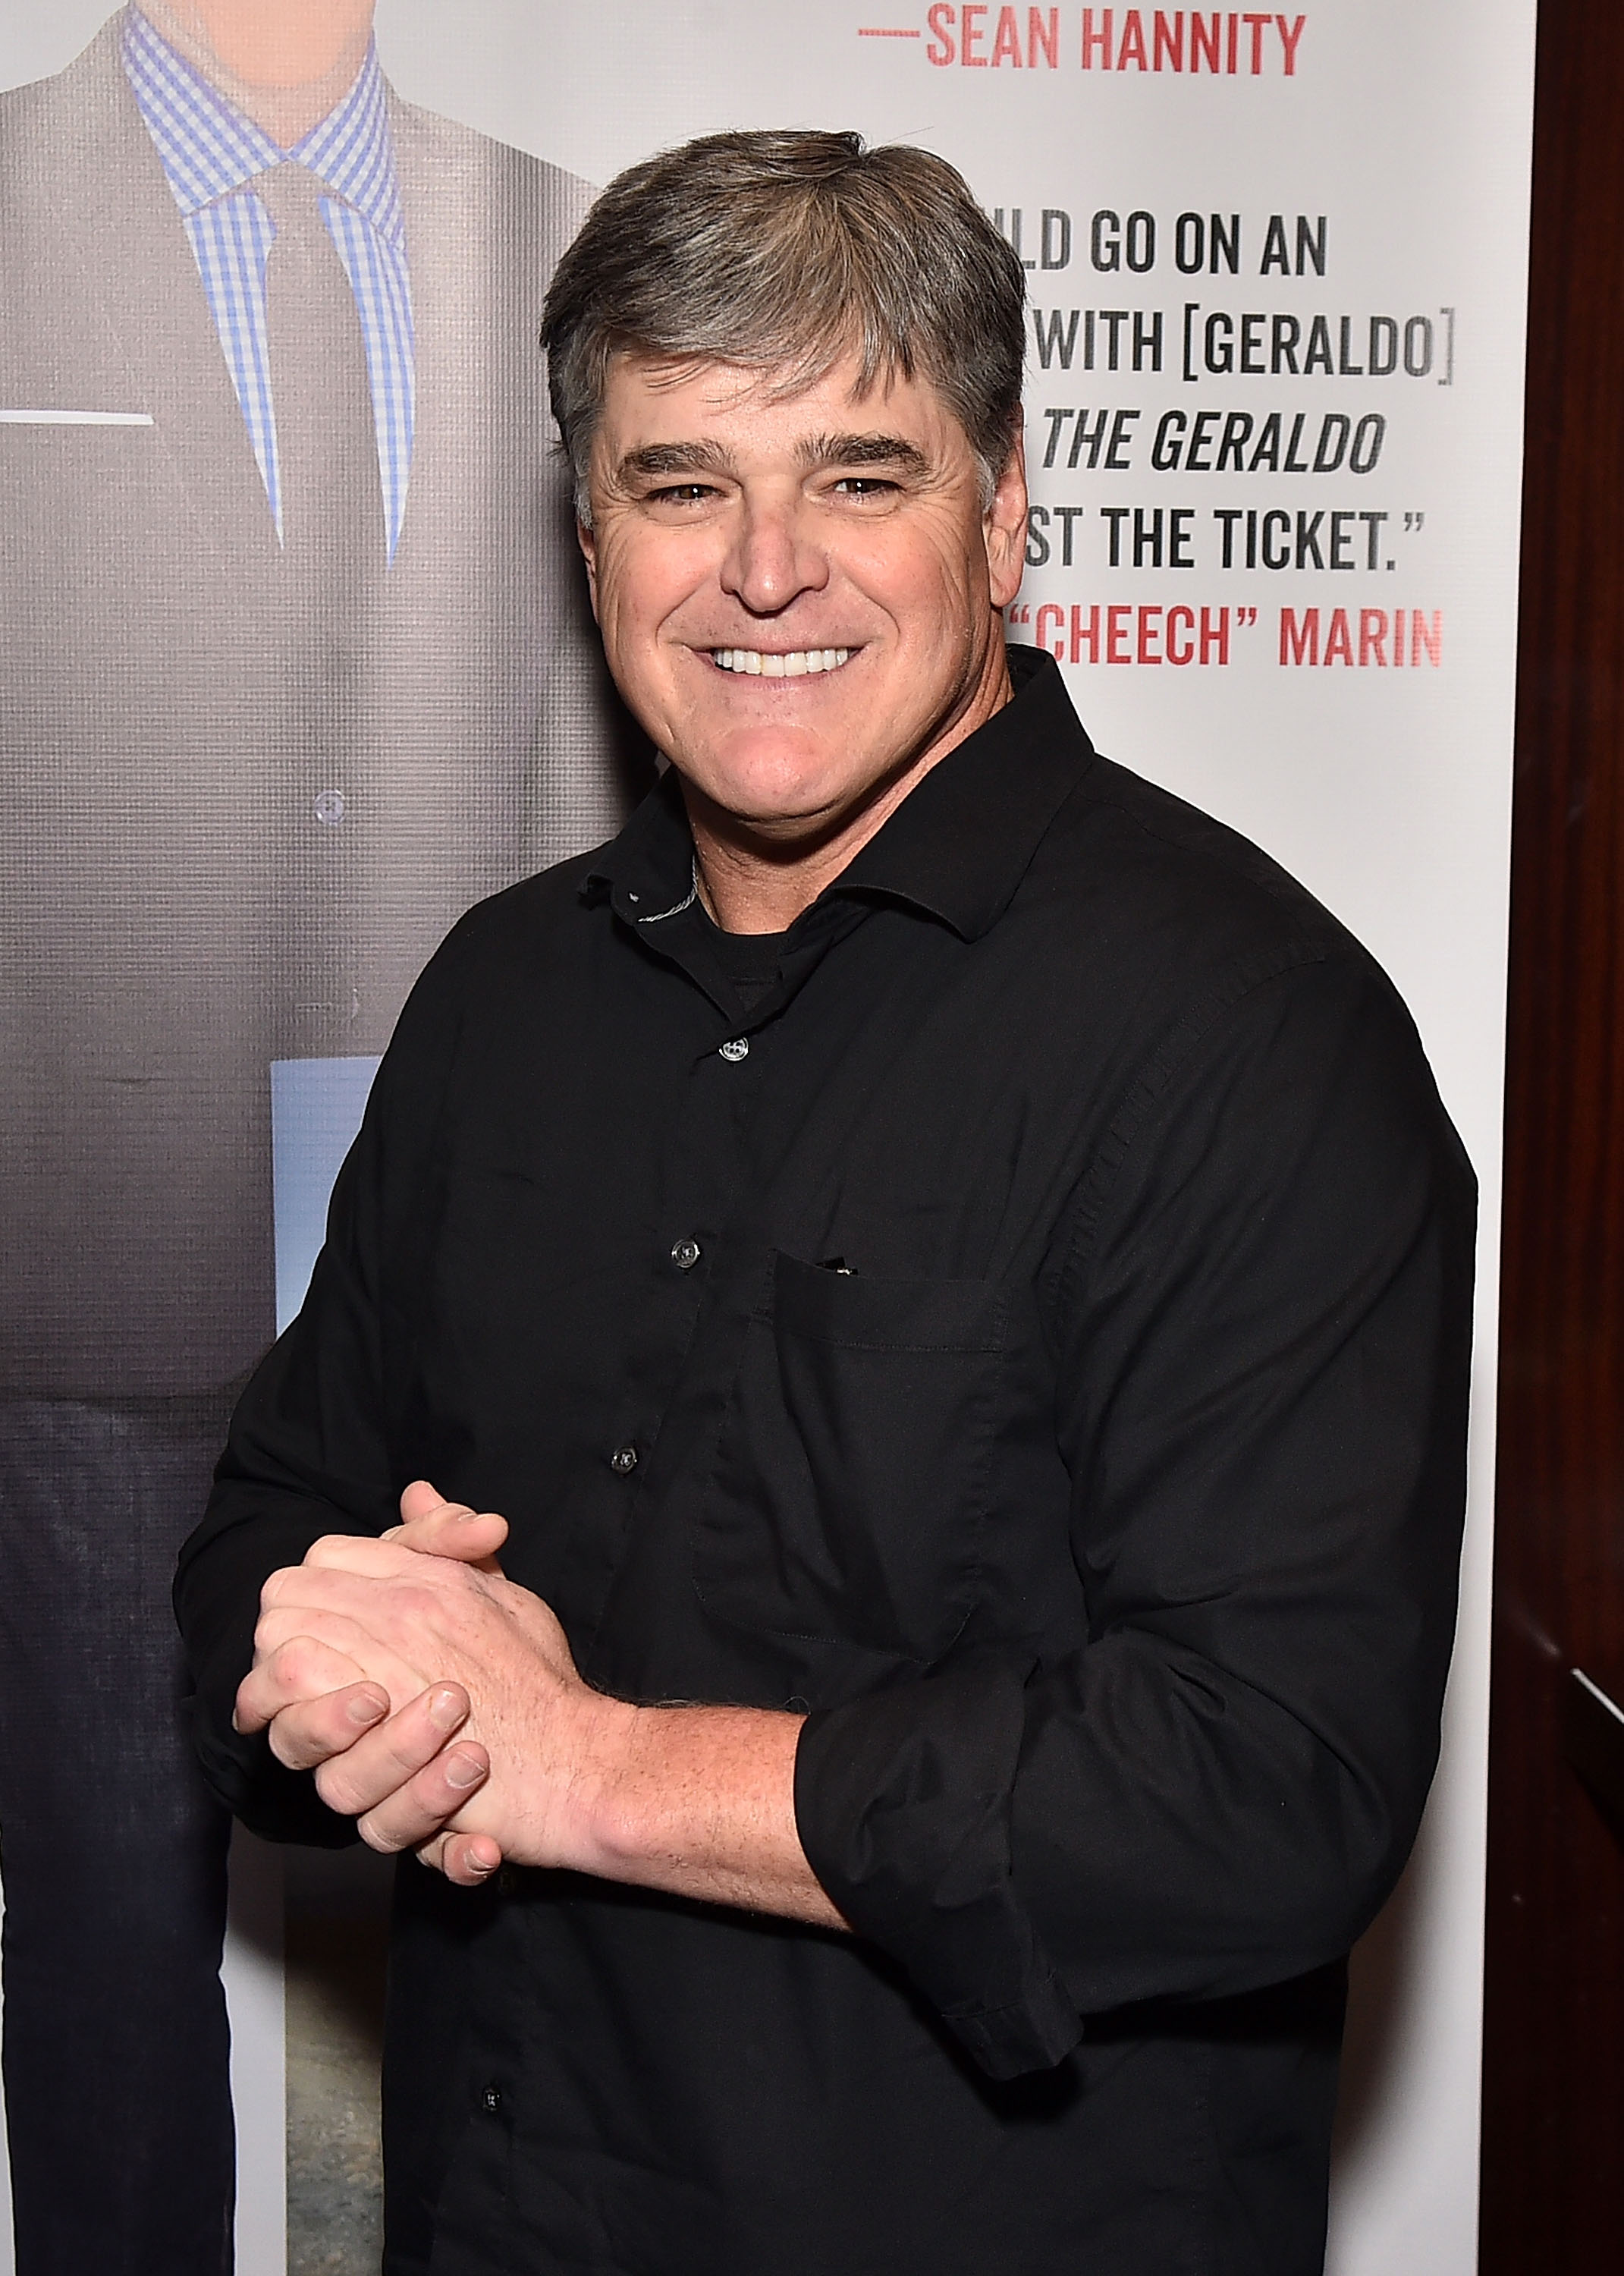  Sean Hannity attends Geraldo Rivera Launches His New Book "The Geraldo Show: A Memoir" at Del Frisco's Grille on April 2, 2018 in New York City. | Photo: GettyImages